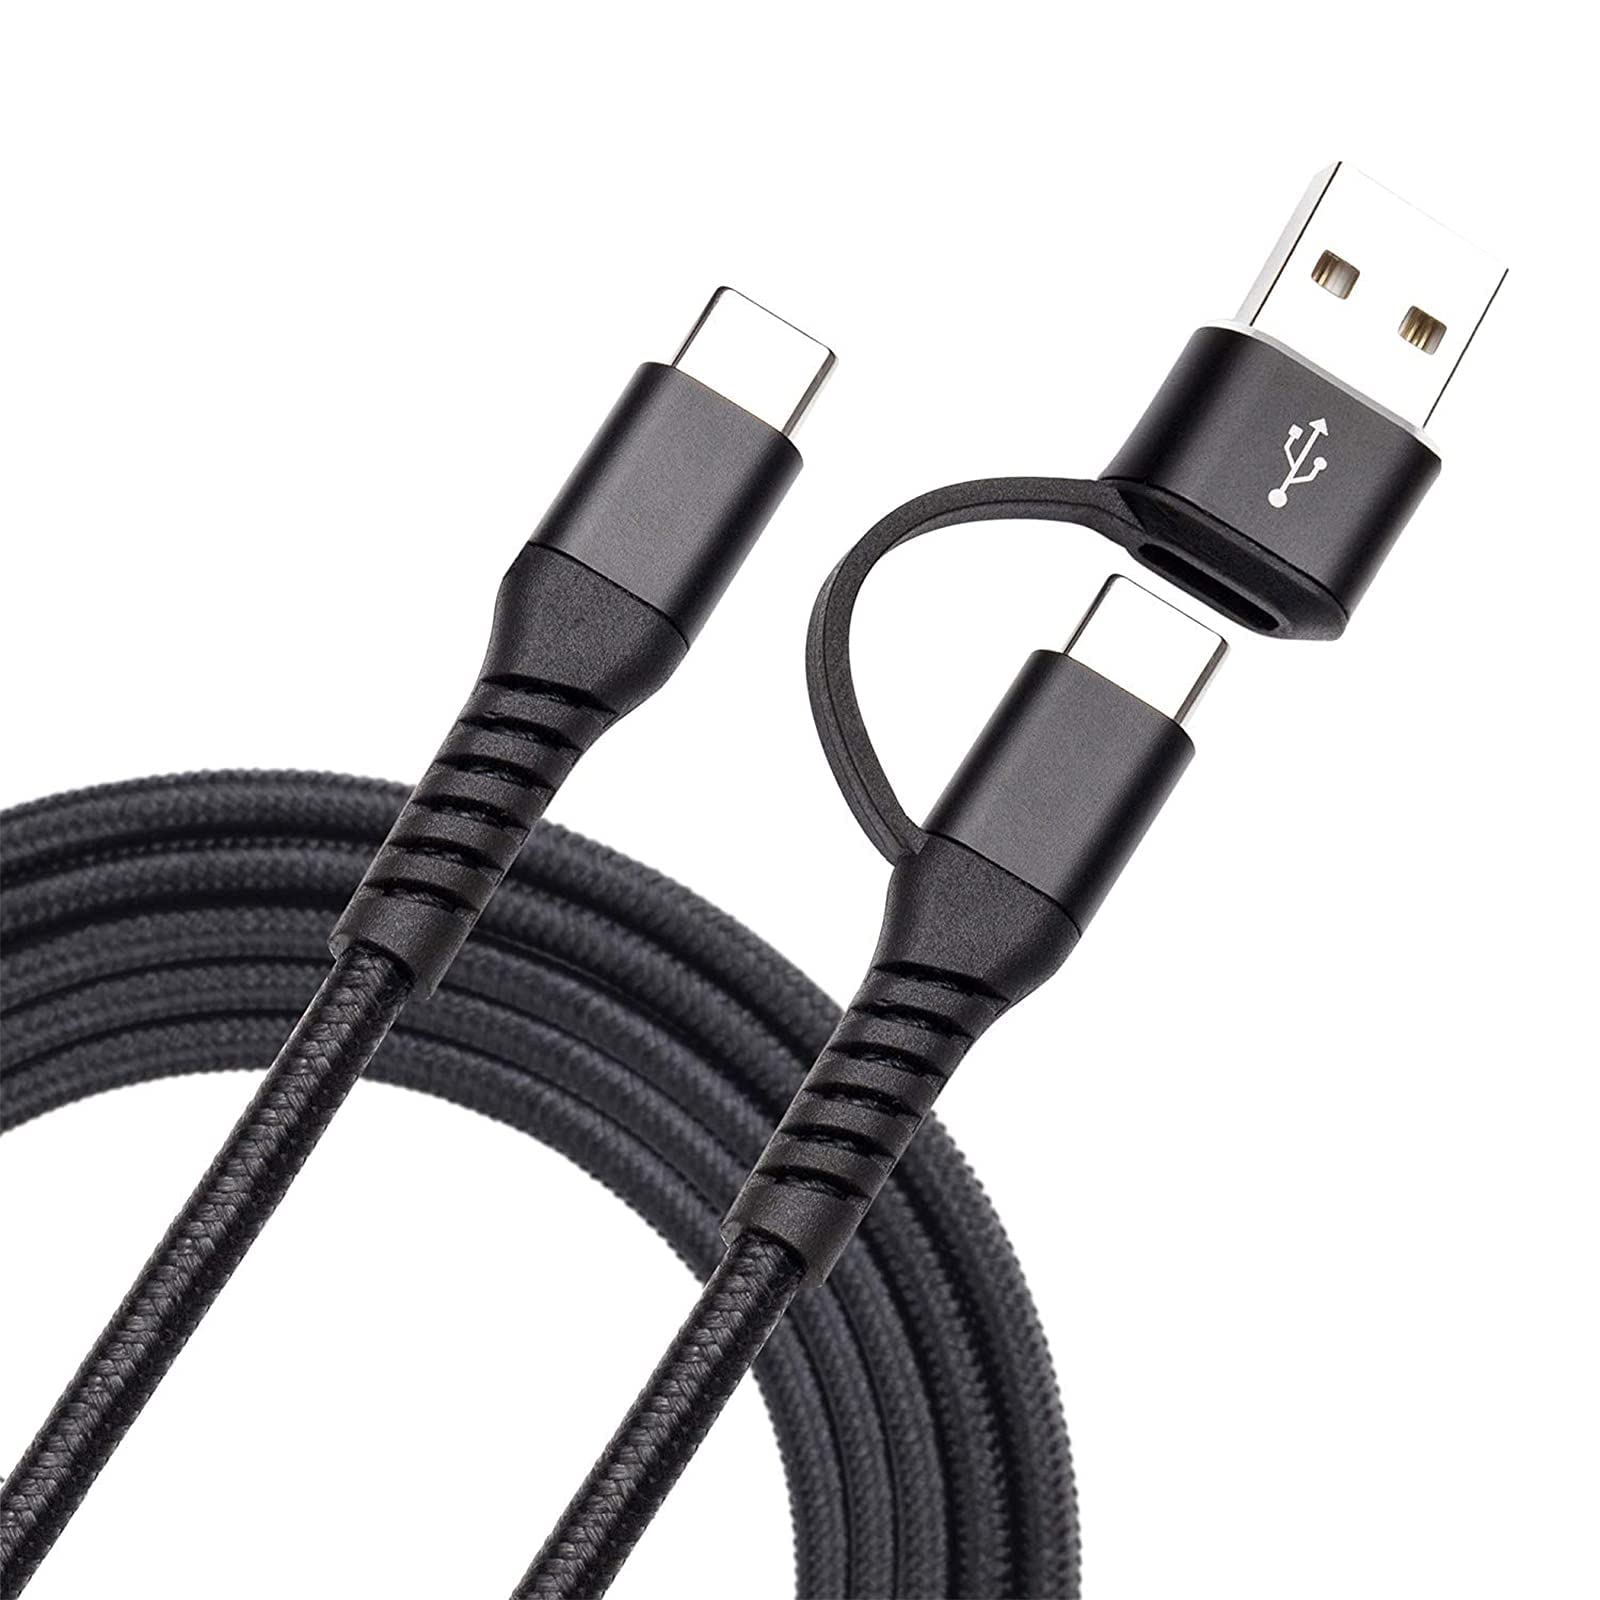 Book Cover USB C to USB C Cable 60W 10ft,QC&PD 2-in-1 USB-A/C to USB-C Fast Charger Cord for Apple MacBook Pro/Air 2020/2019/2018,iPad Pro 2020/2019/2018,Samsung Galaxy S21,Type-C Laptops